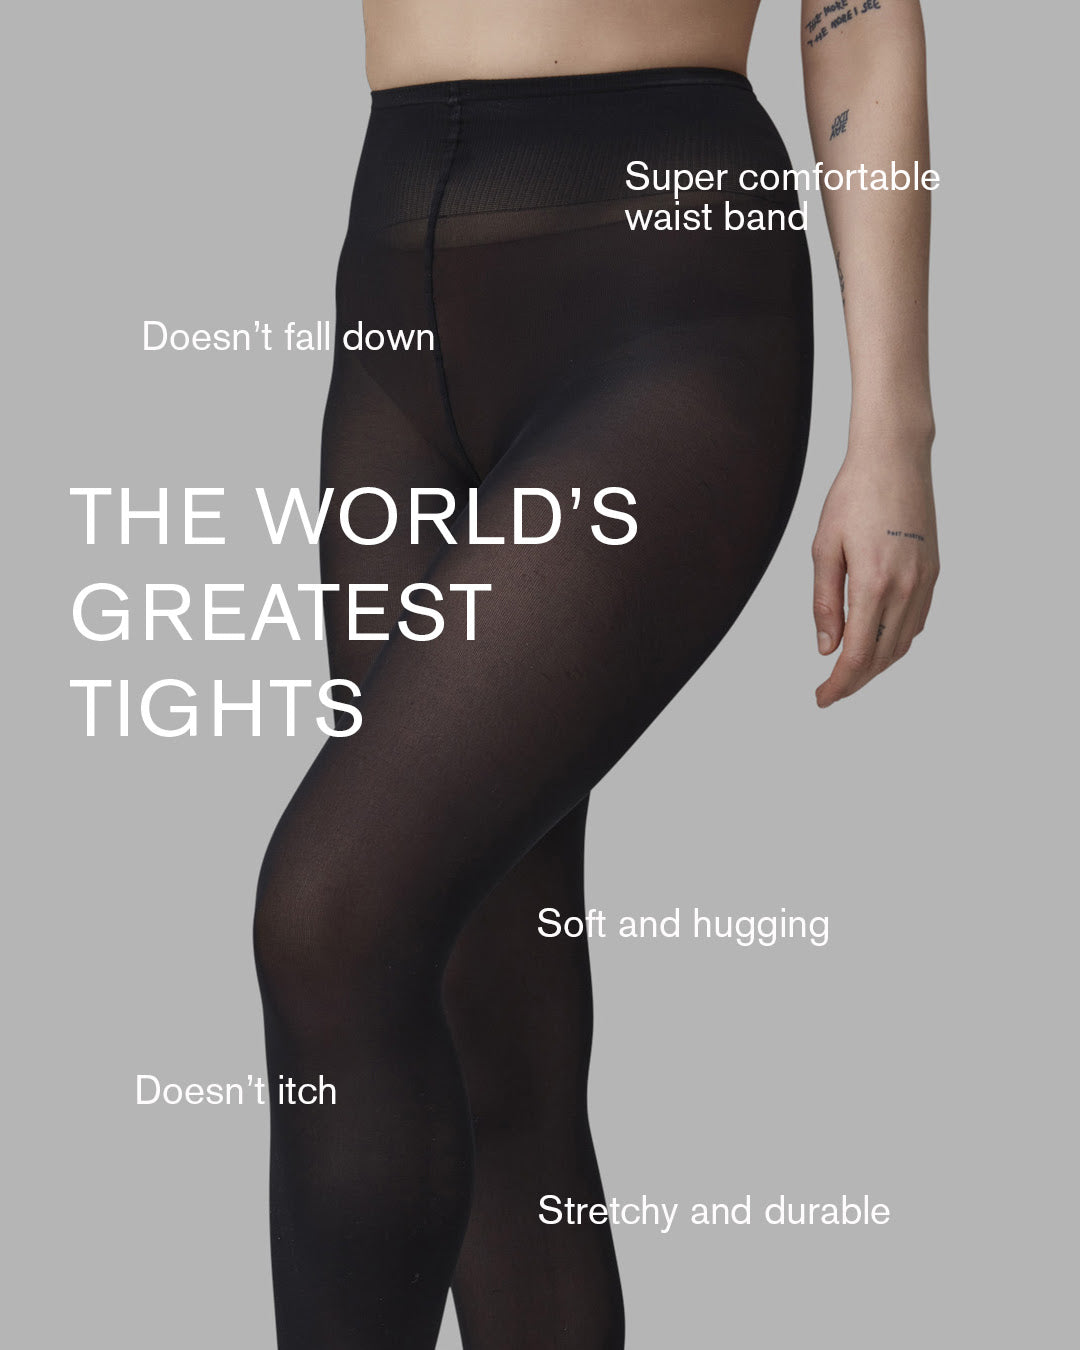 Is it worth spending money on expensive tights this winter? – The Irish News